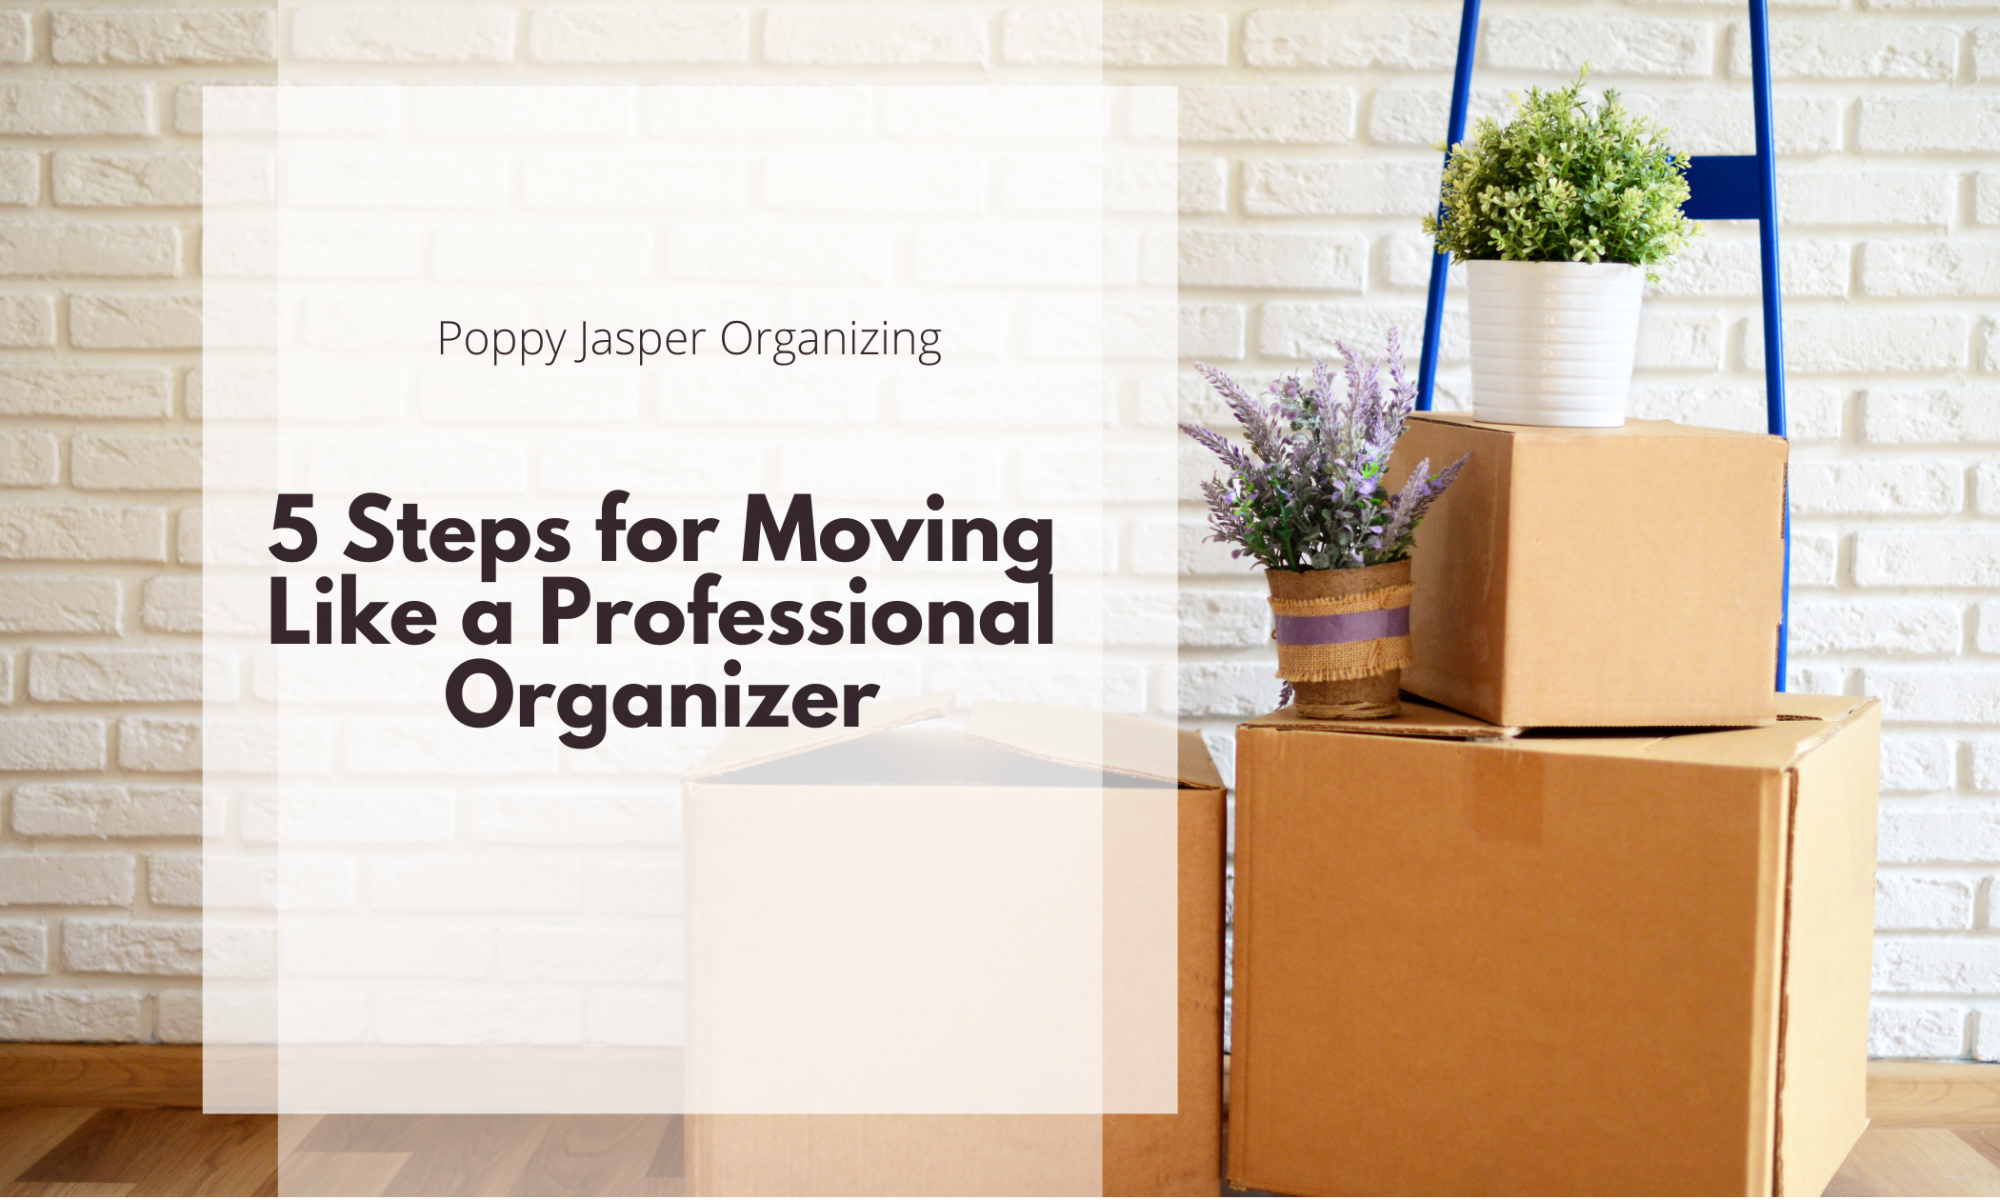 5 Steps for Moving Like a Professional Organizer